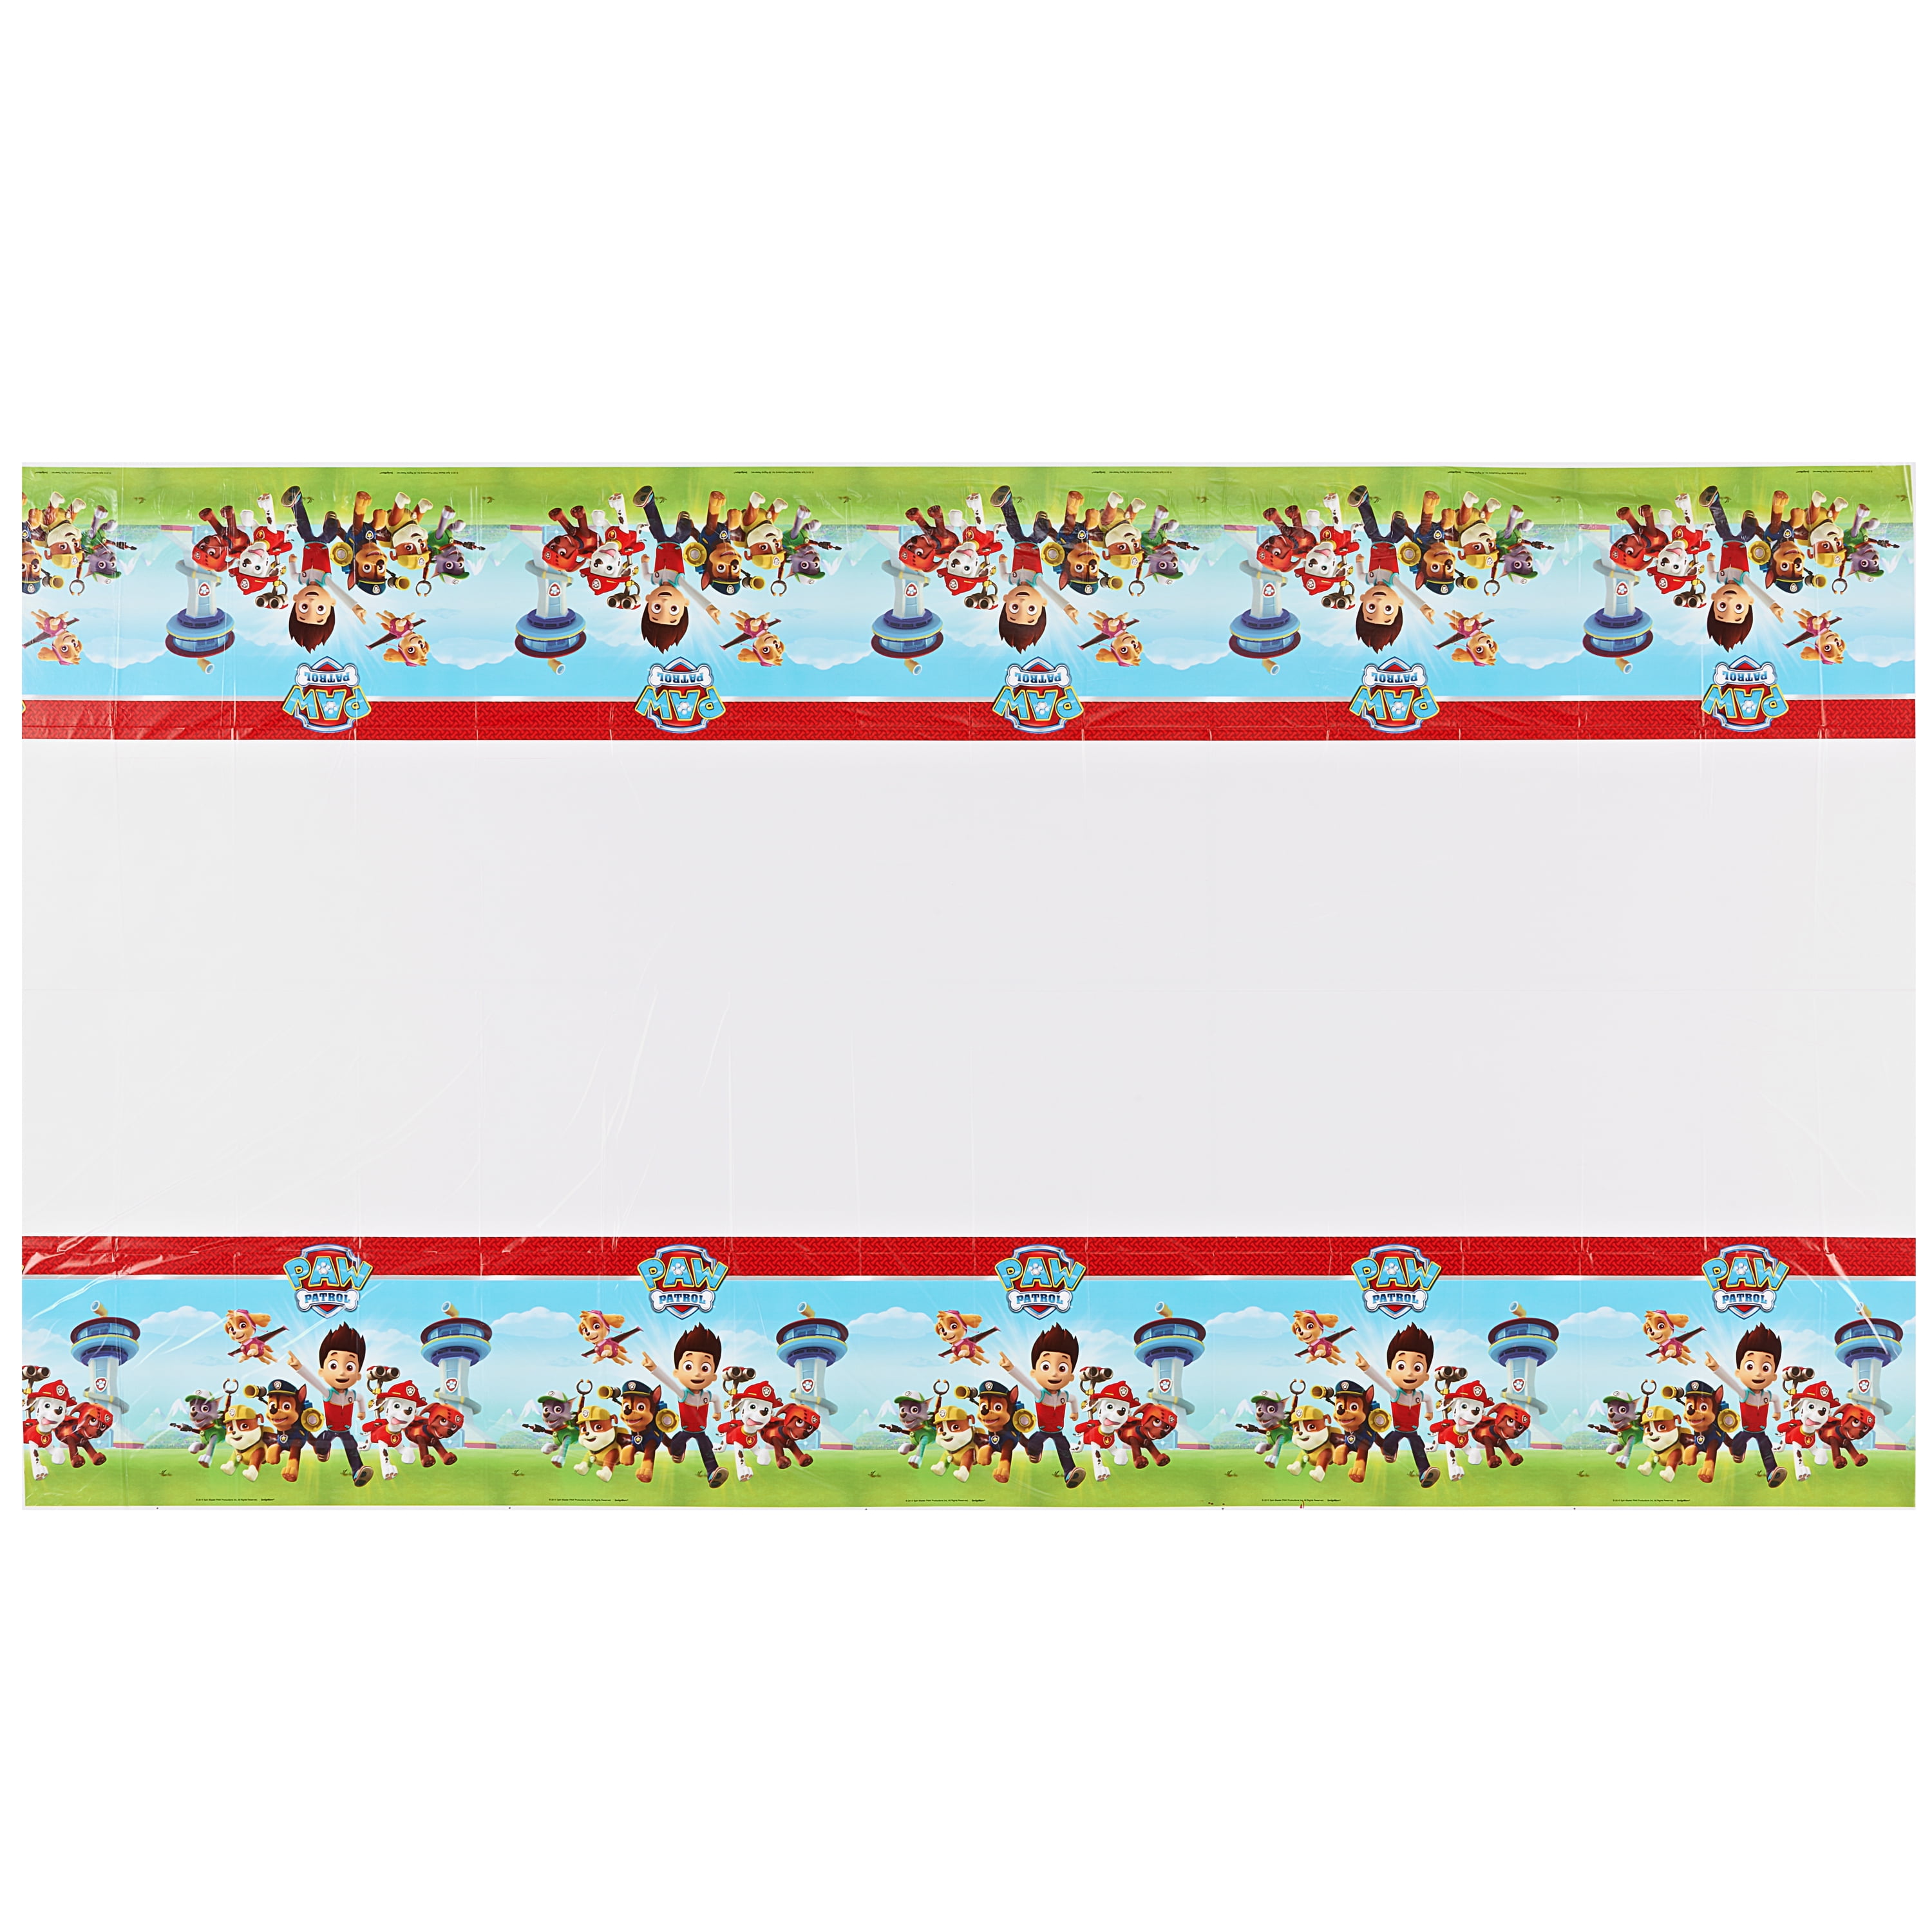 Cat Pet Paw Plastic Table Cover for Paw Patrol Party Supplies Dog Theme Birthday Party Decorations Cat Theme Birthday Party 4pcs 54x108in Puppy Dog Pet Paw Patrol Print Disposable Plastic Tablecloth